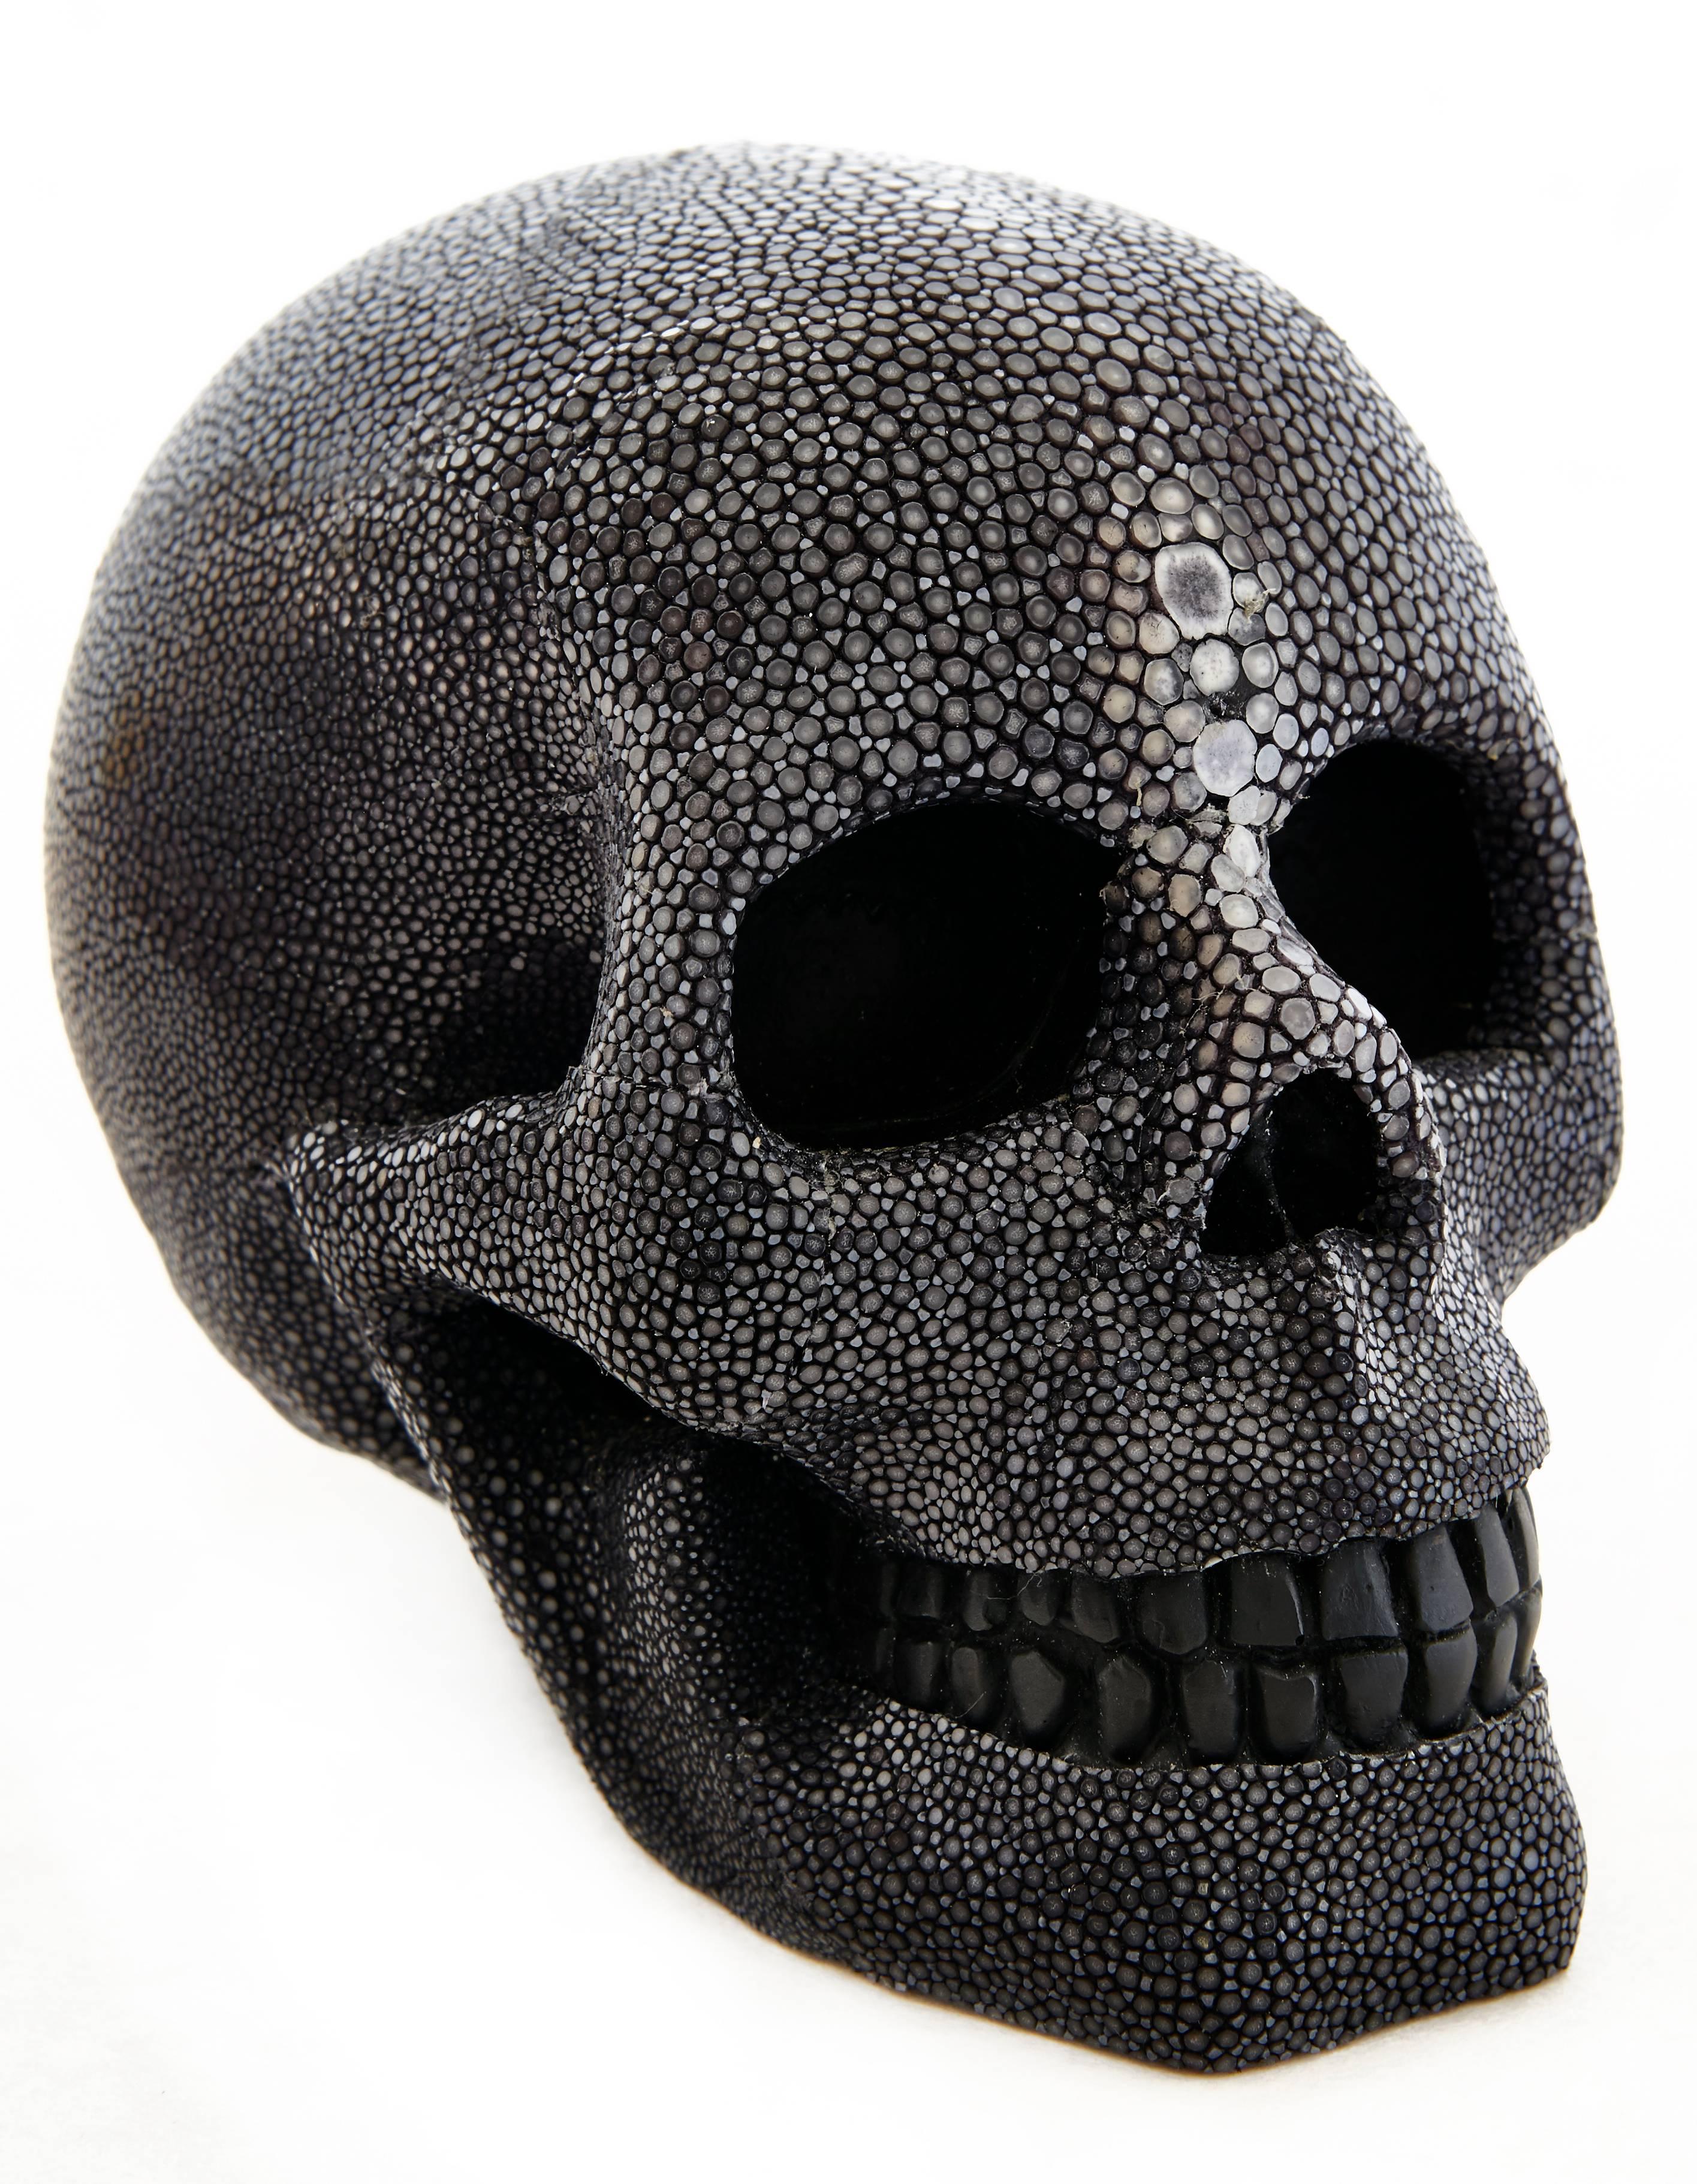 Adapted from Christina Z Antonio’s Cadavre Exquis installation at the Gramercy Park Hotel, this mini decorative sculpture features hand-molded shagreen covering a resin cast skull. Weight is 3lbs. .